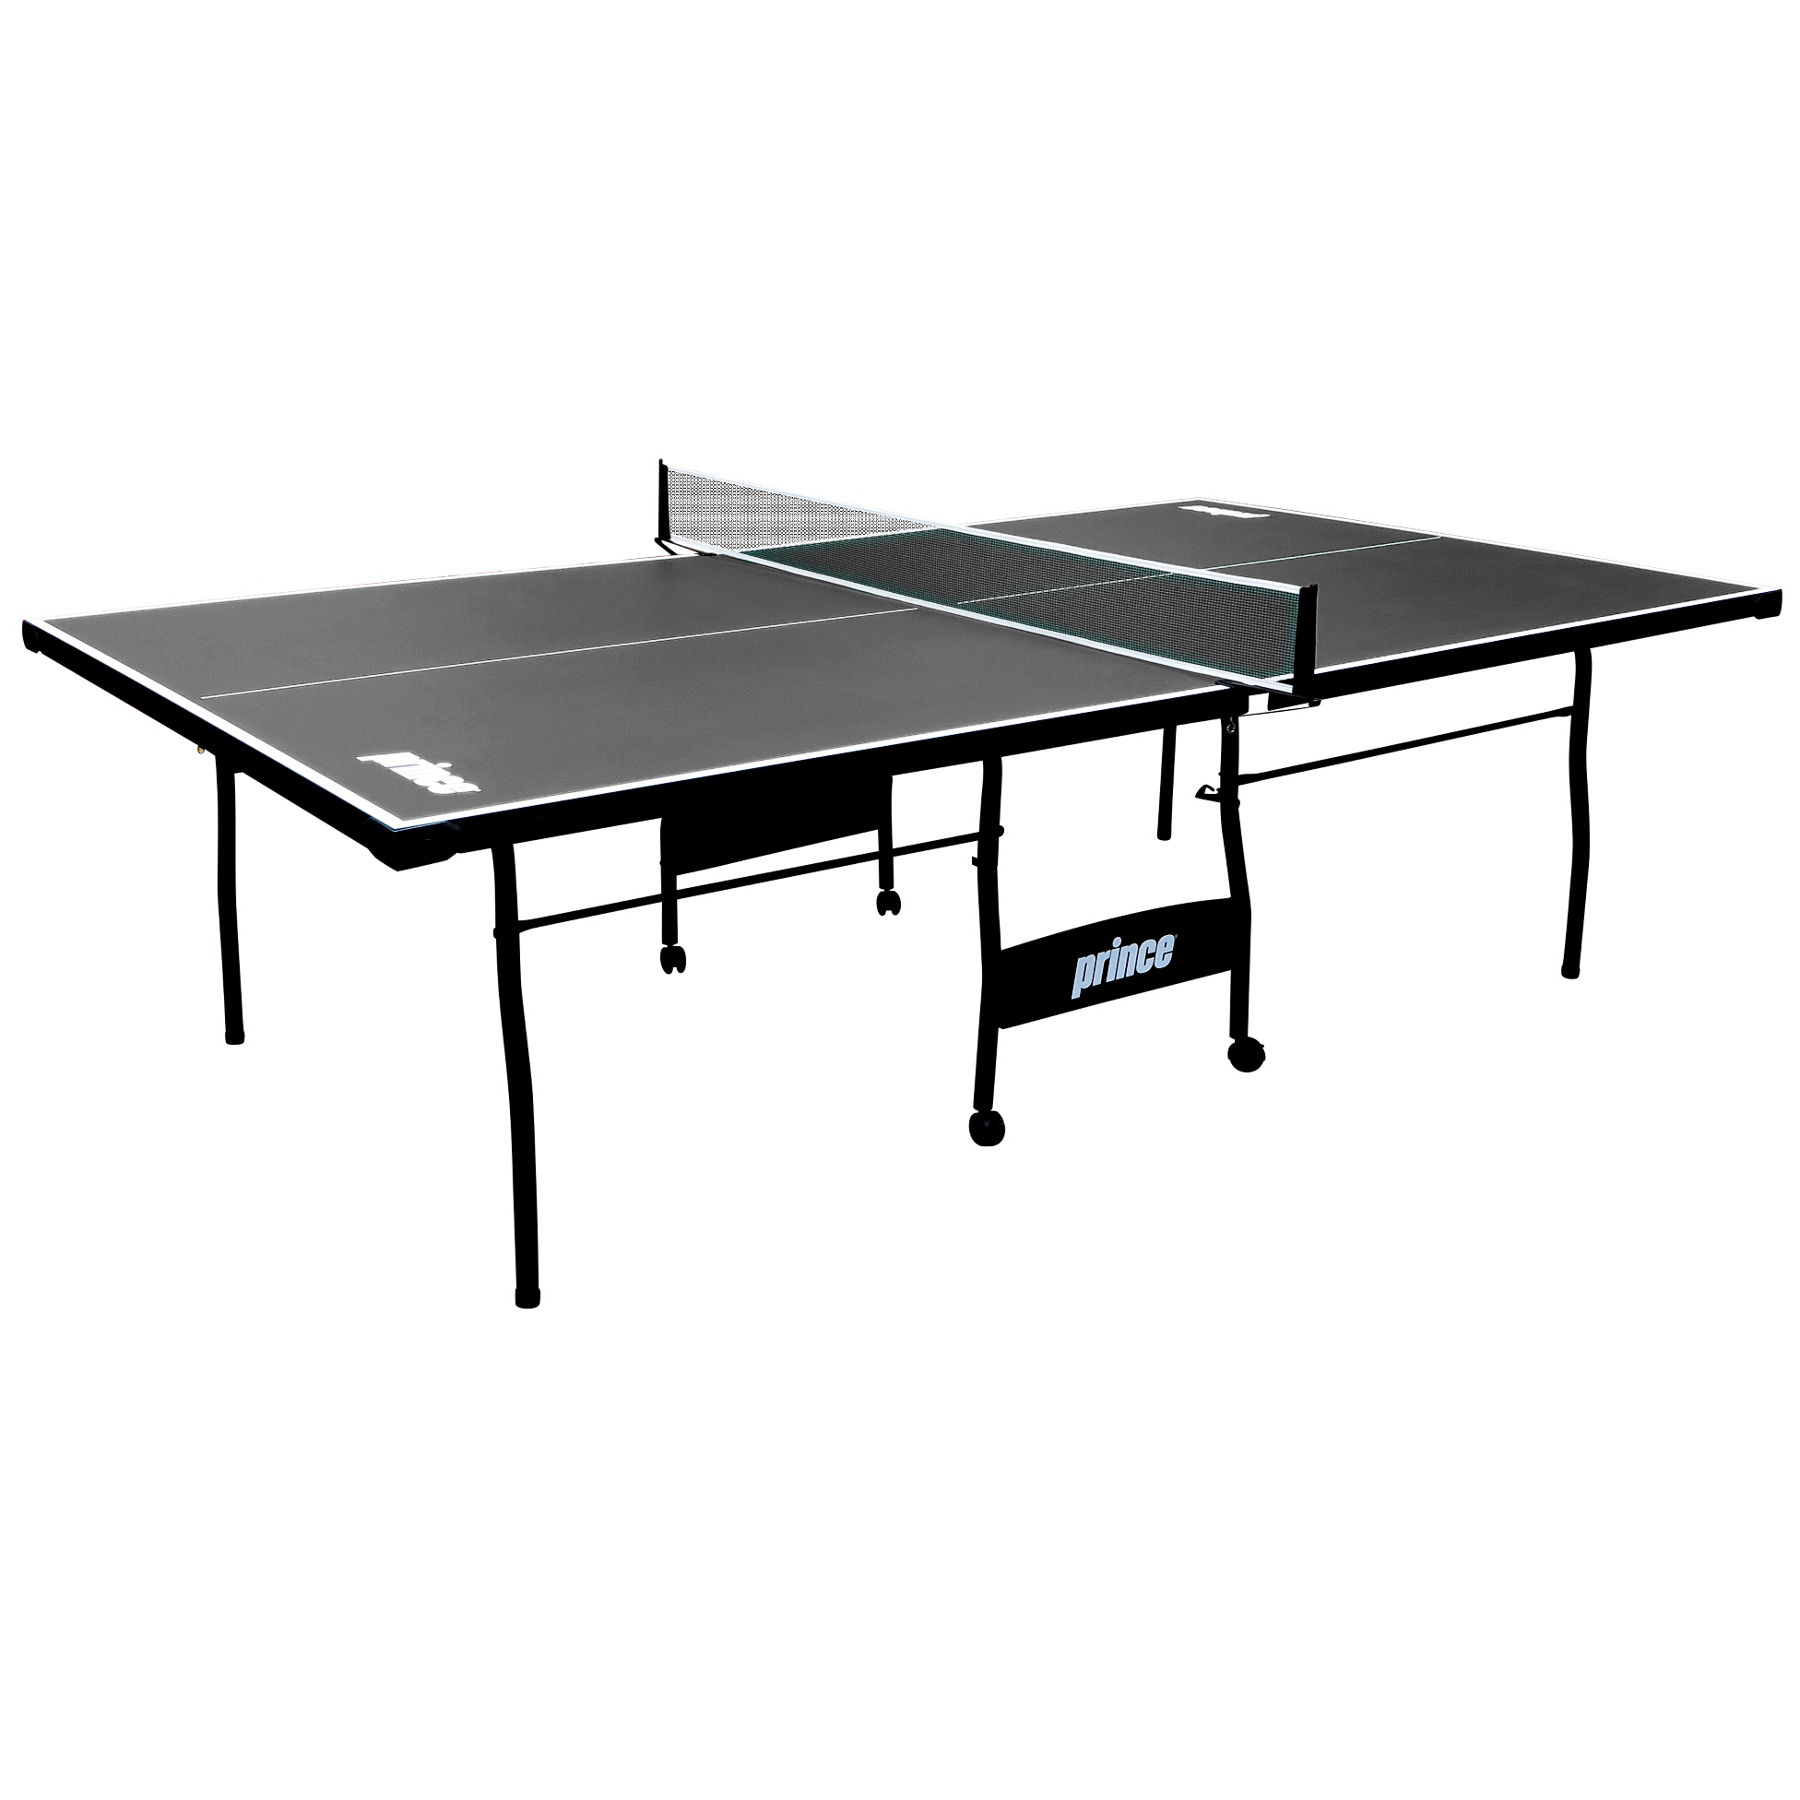 Prince VICTORY (15mm) Table Tennis Table( Black) | Shop ...